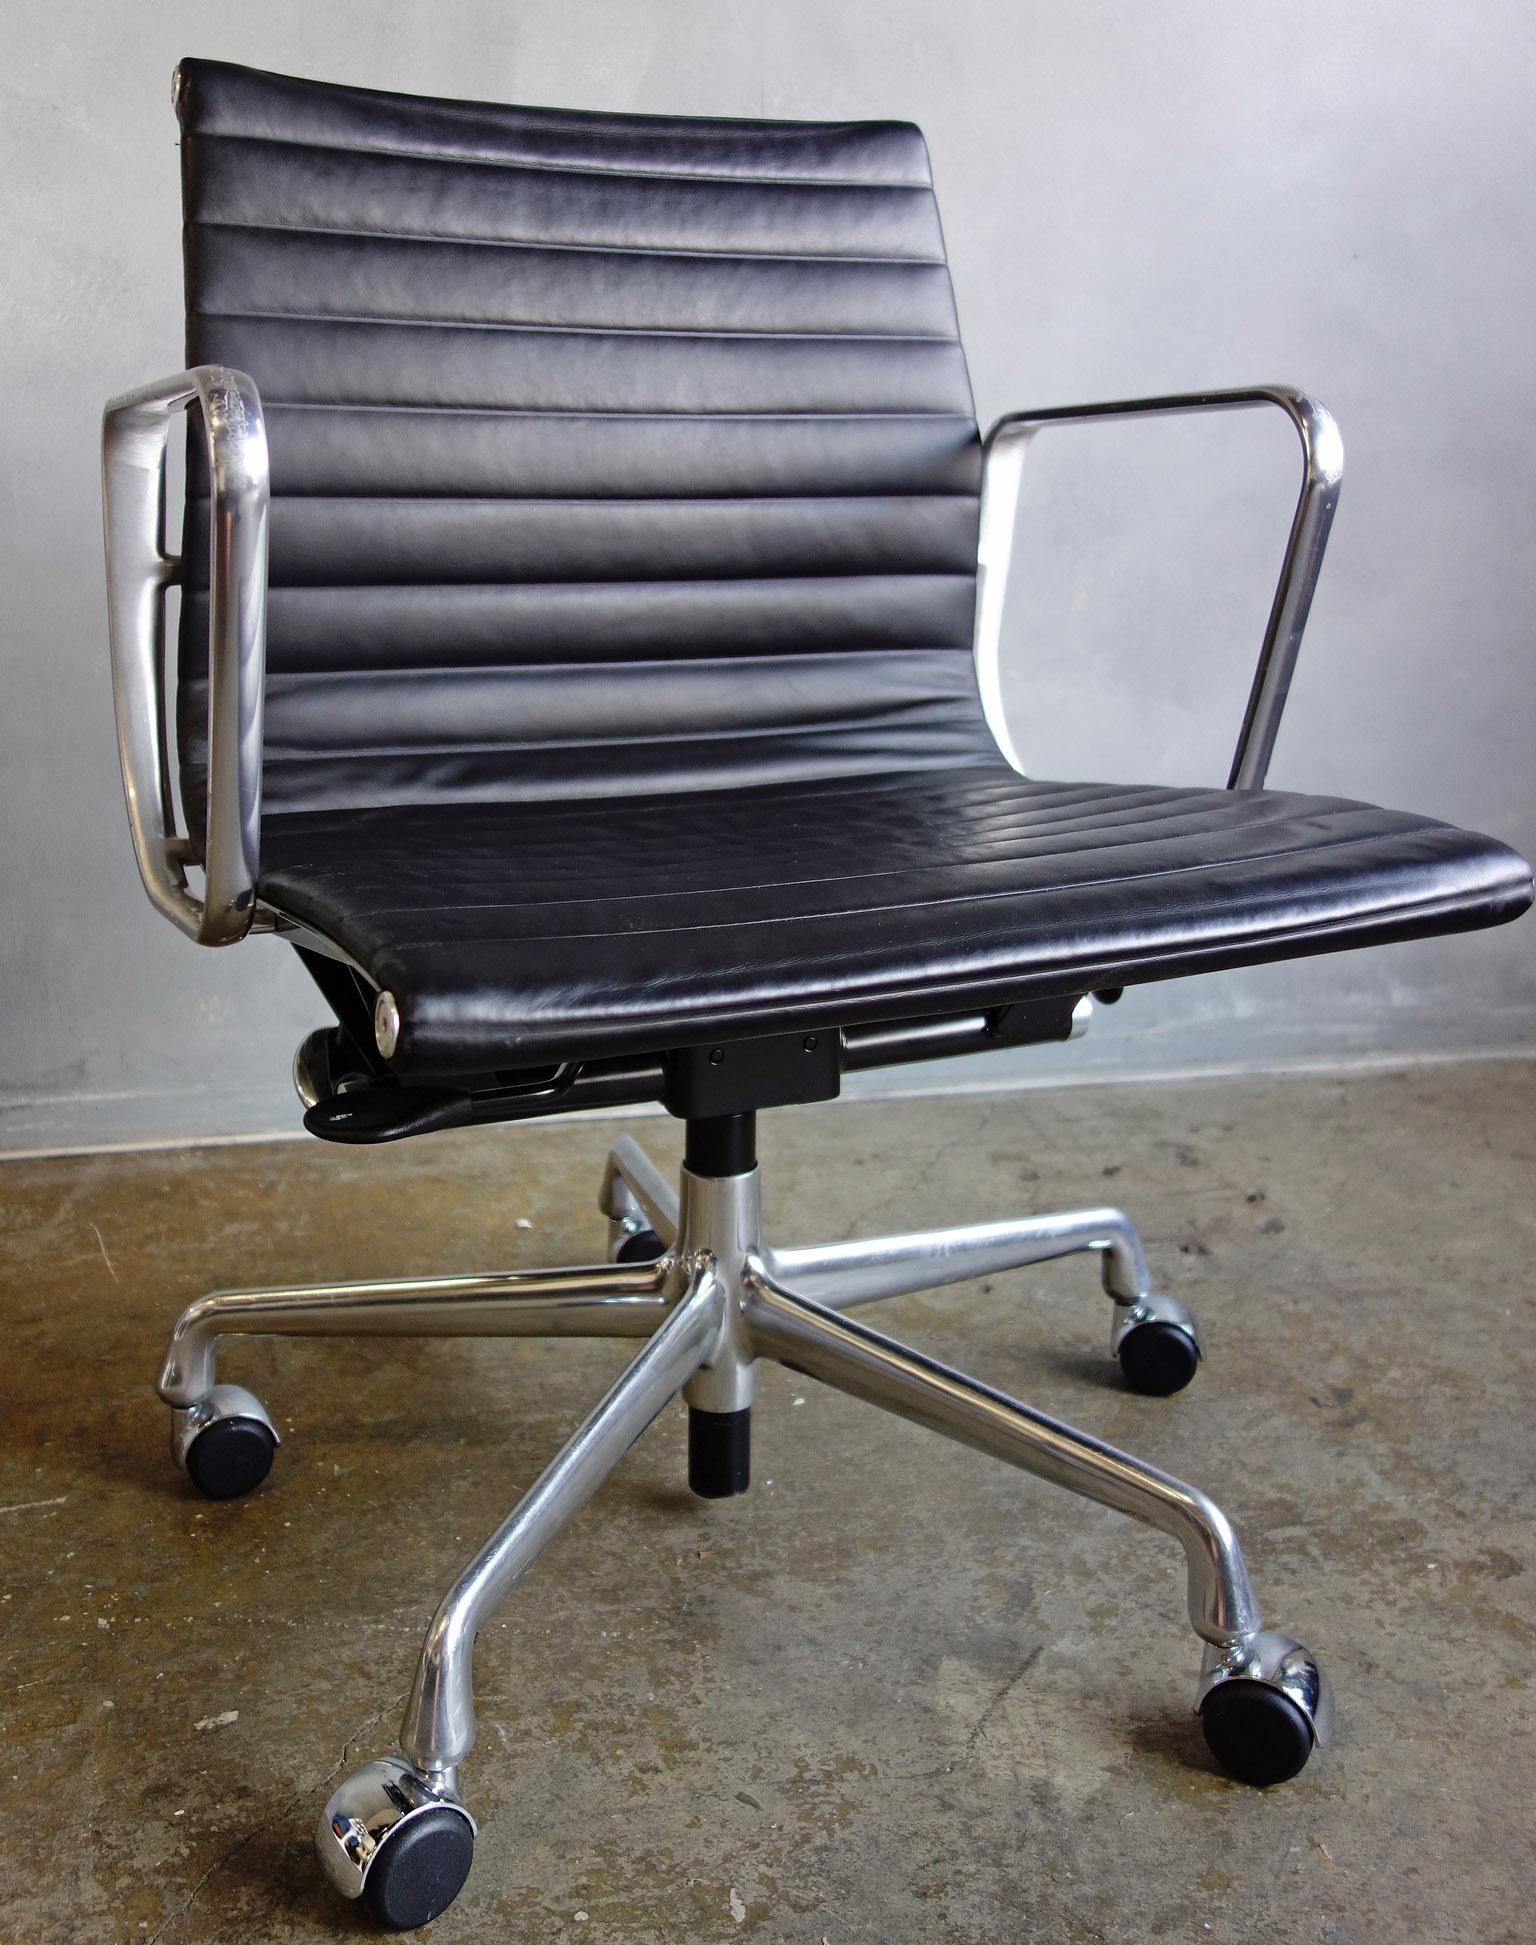 For your consideration are up to 10 midcentury Eames side chairs upholstered in black leather. Elegance and comfort separates this iconic chair from the rest. The leather is in good condition with the arms having some scratches and dings typical of